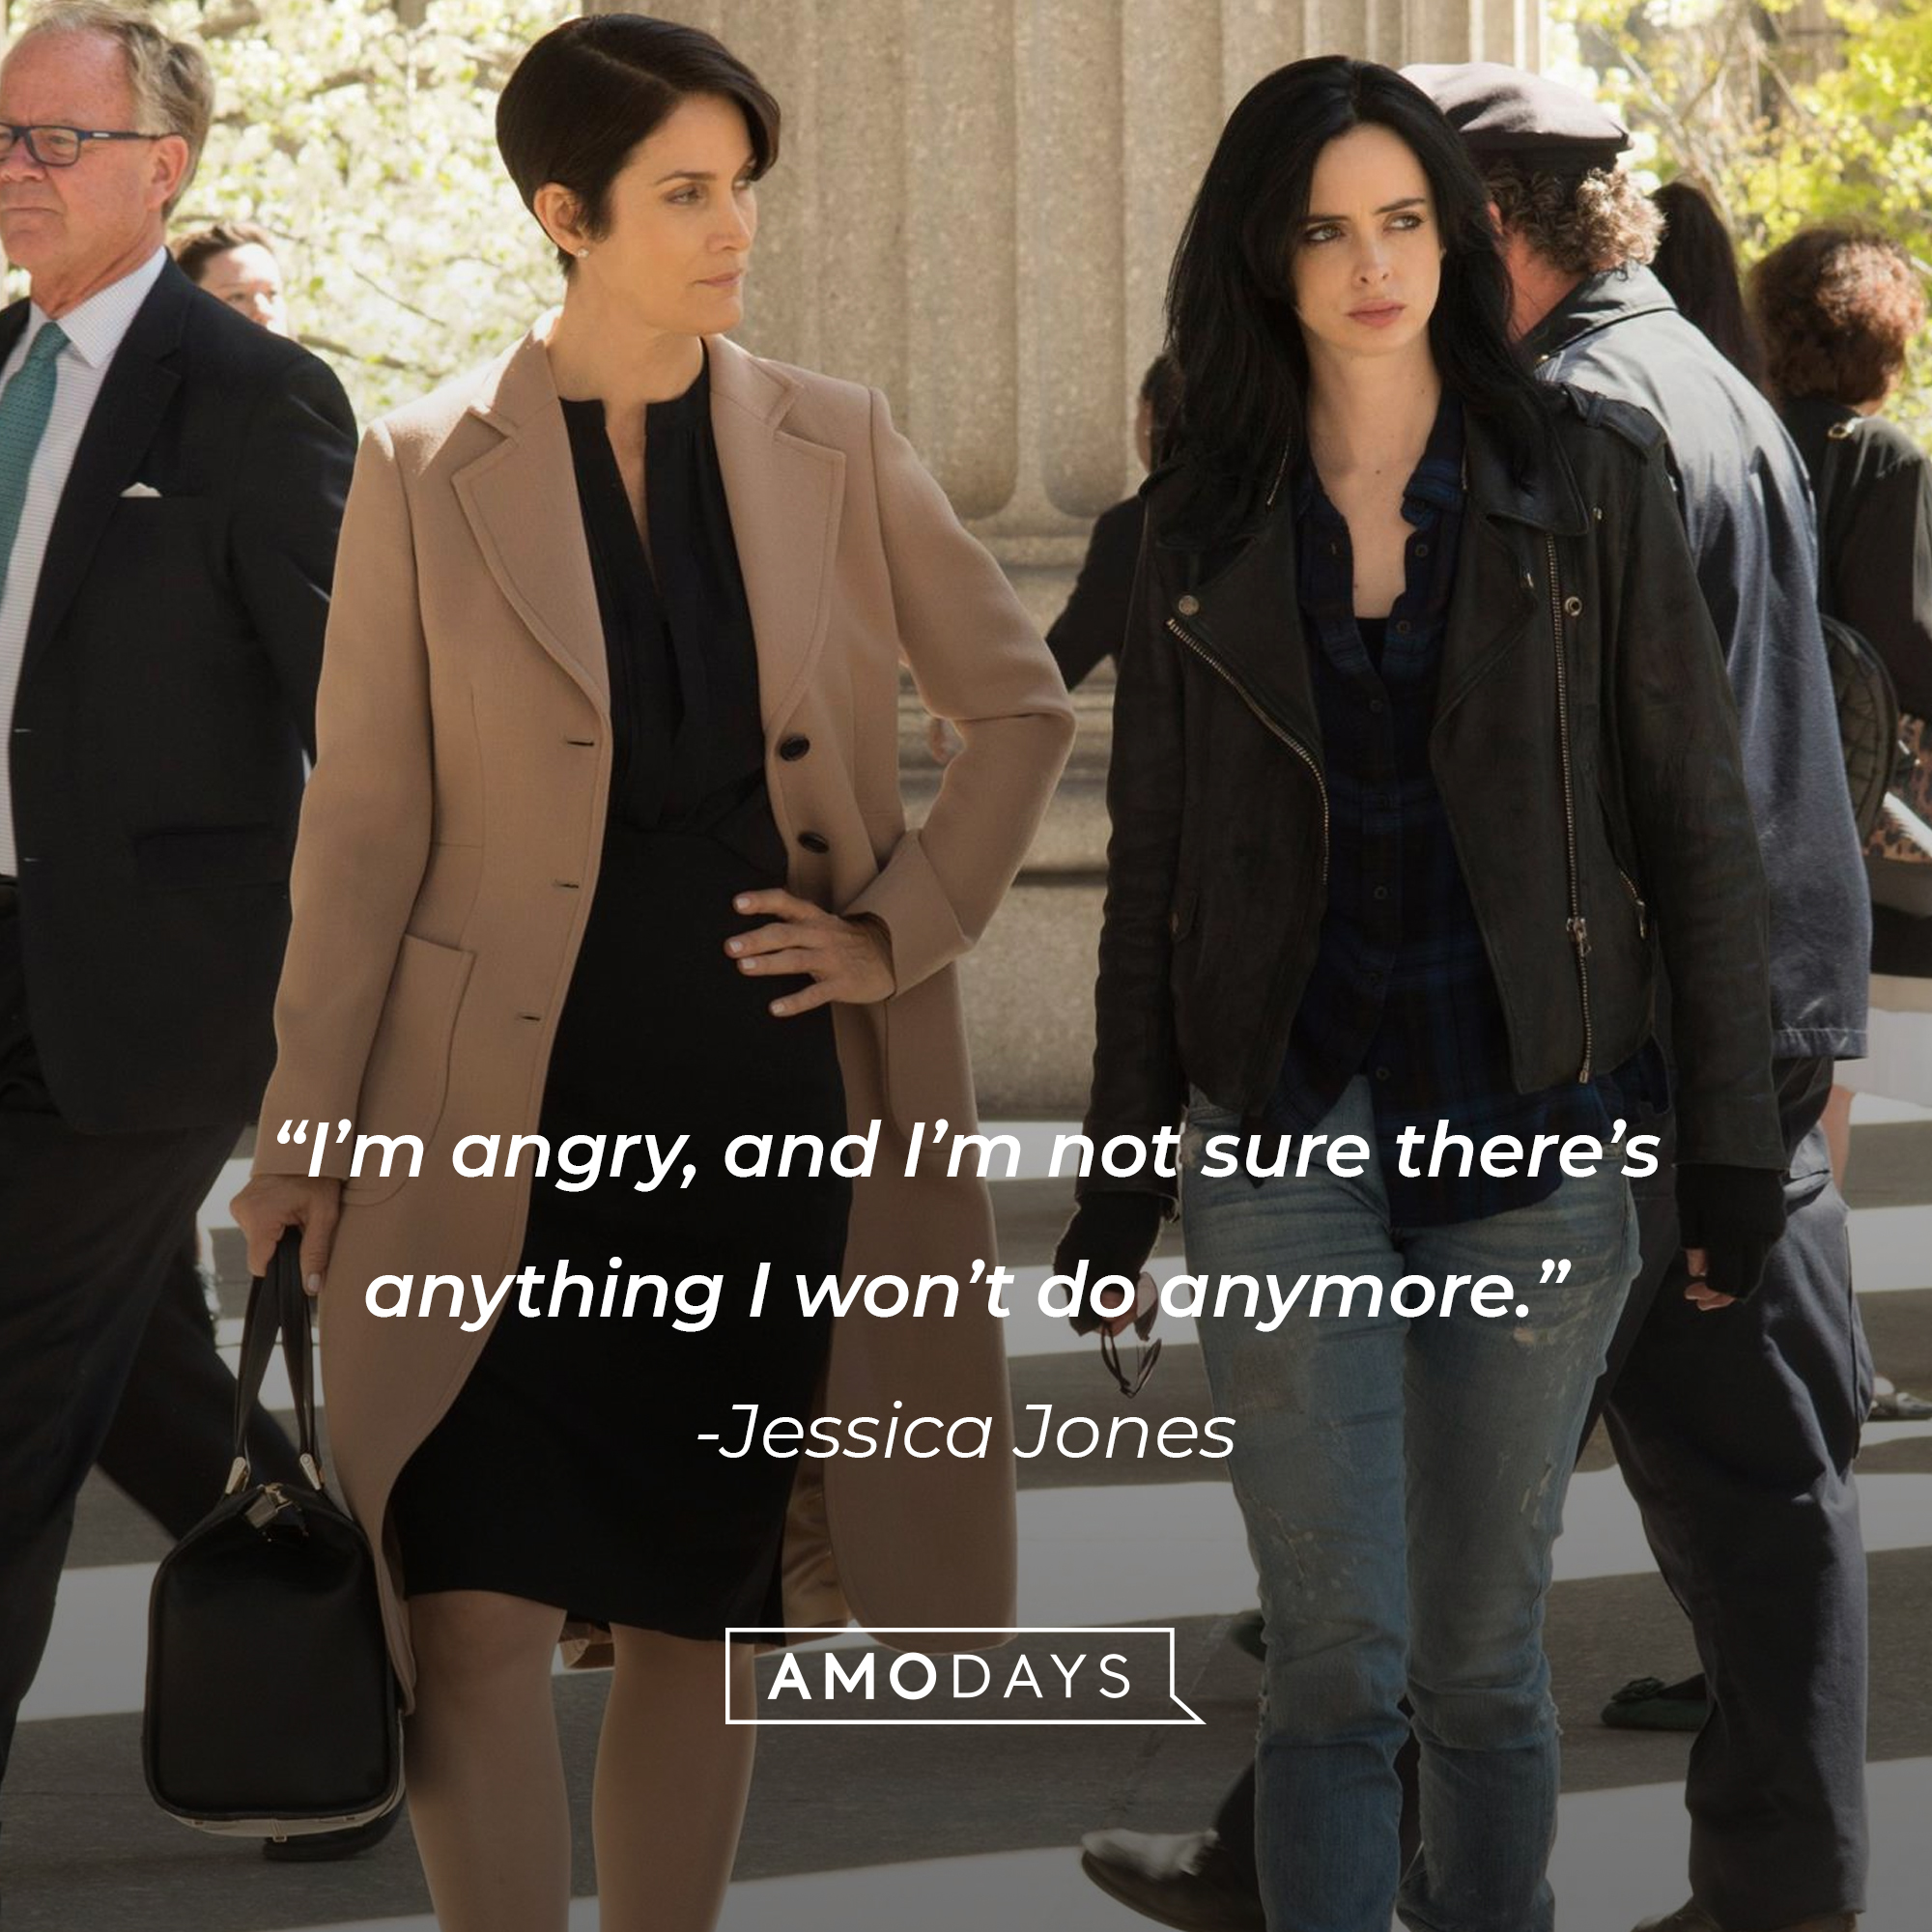 An image of Jessica Jones and Jeryn "Jeri" Hogarth with Jones’  quote: "Knowing it's real means you gotta make a decision. One, keep denying it. Or two...do something about it."┃Source:facebook.com/JessicaJonesLat